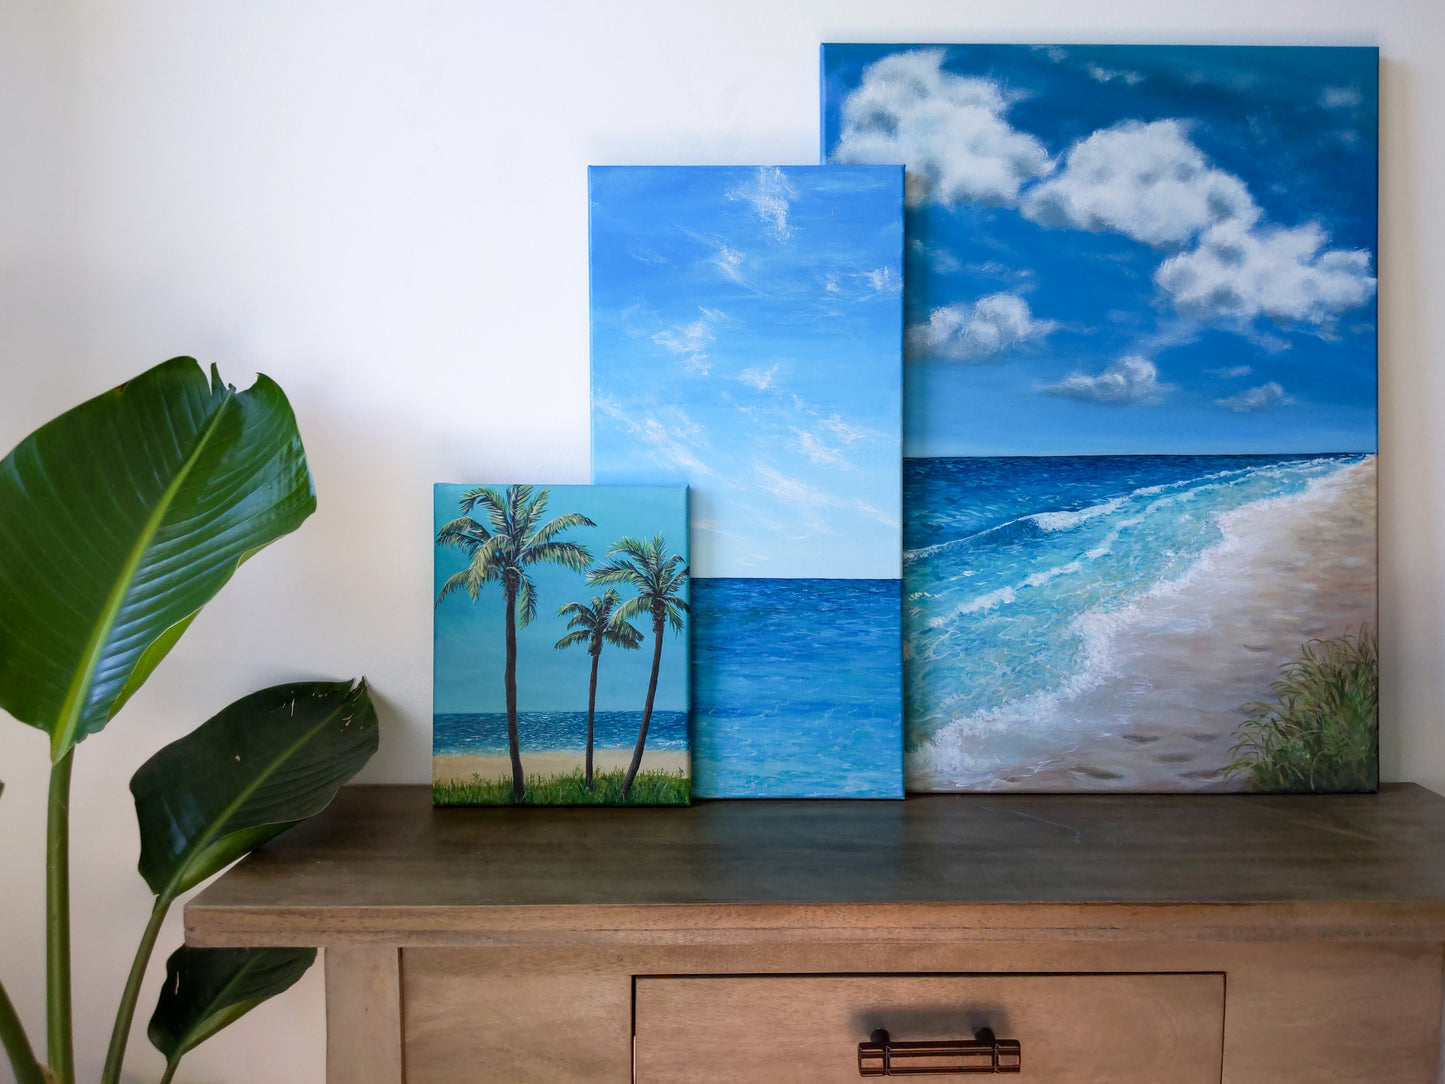 Where the water meets the sky | 10X20 canvas painting